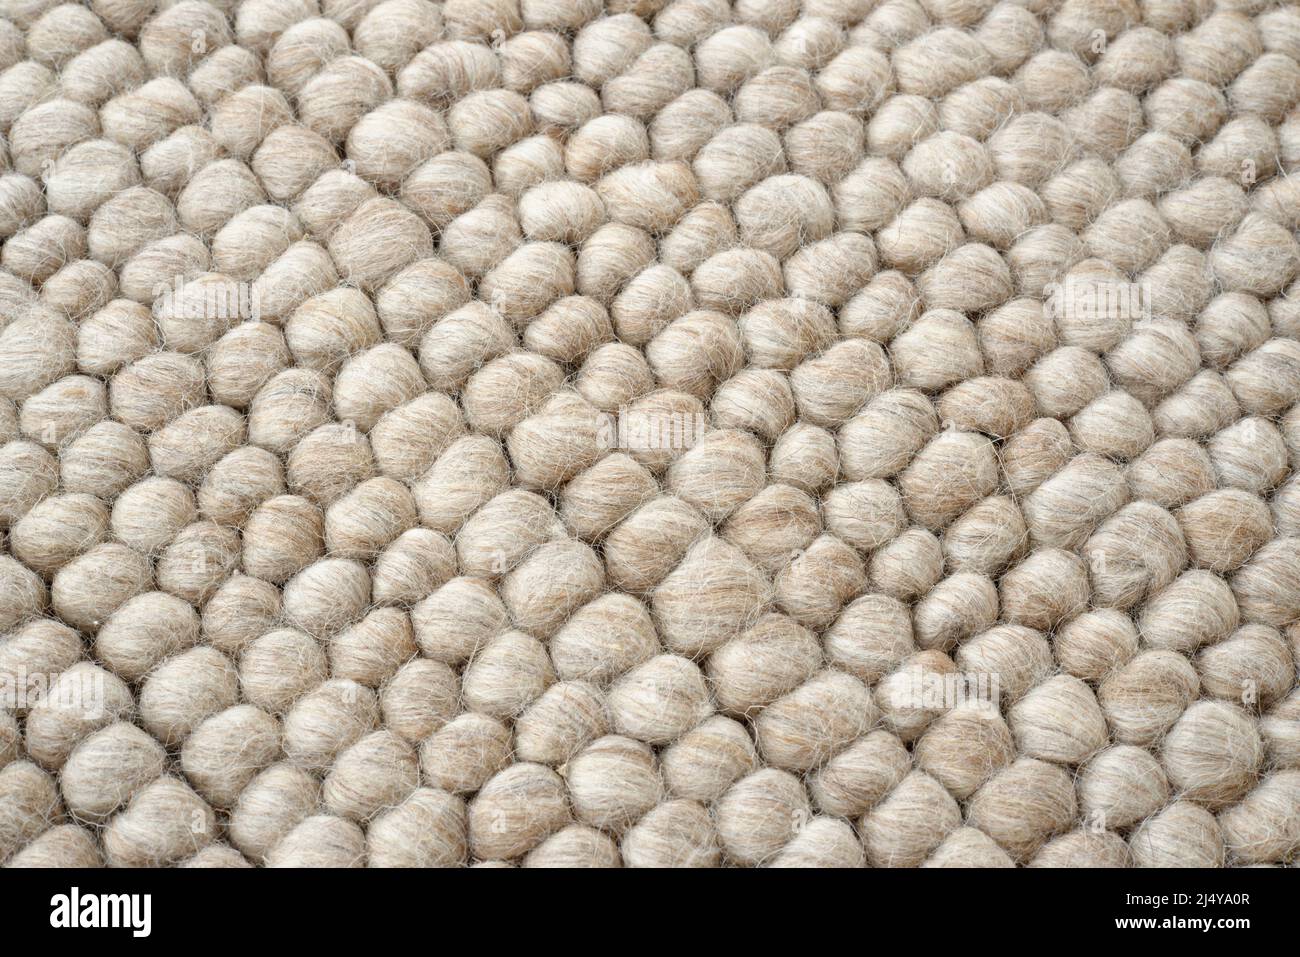 Natural fibres made into a floor covering. Stock Photo